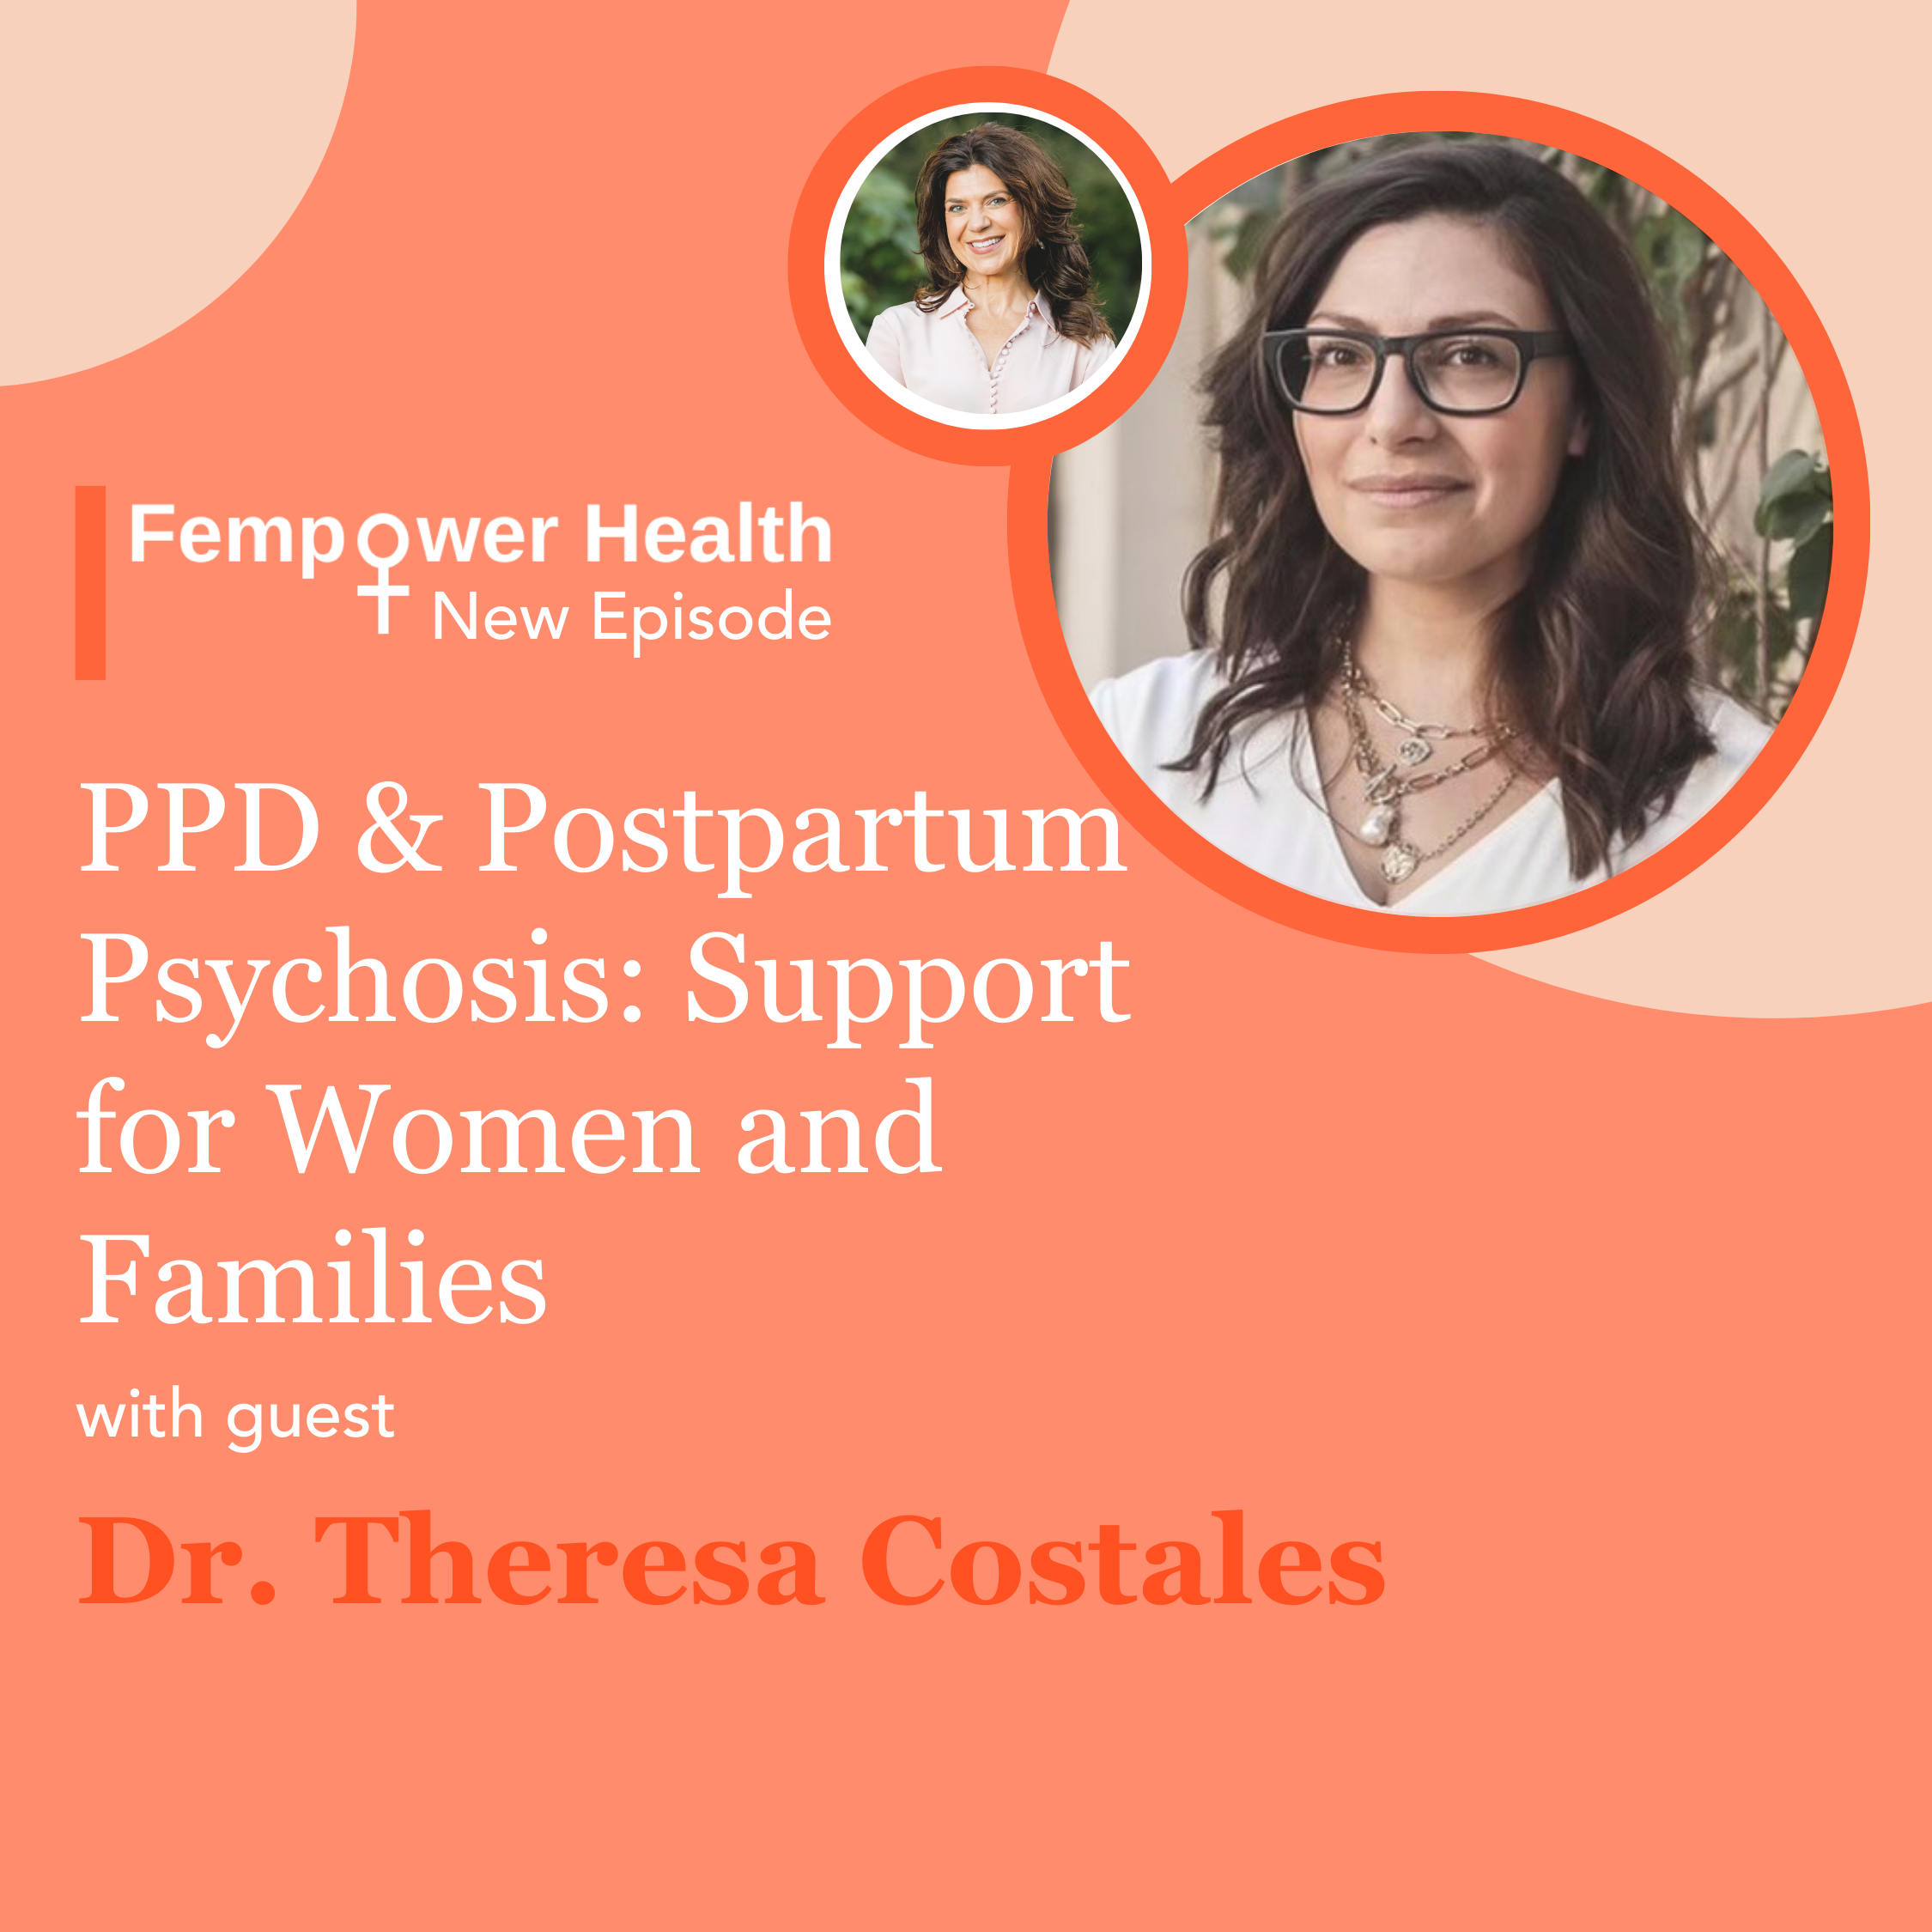 PPD & Postpartum Psychosis: Support for Women and Families | Dr. Theresa Costales